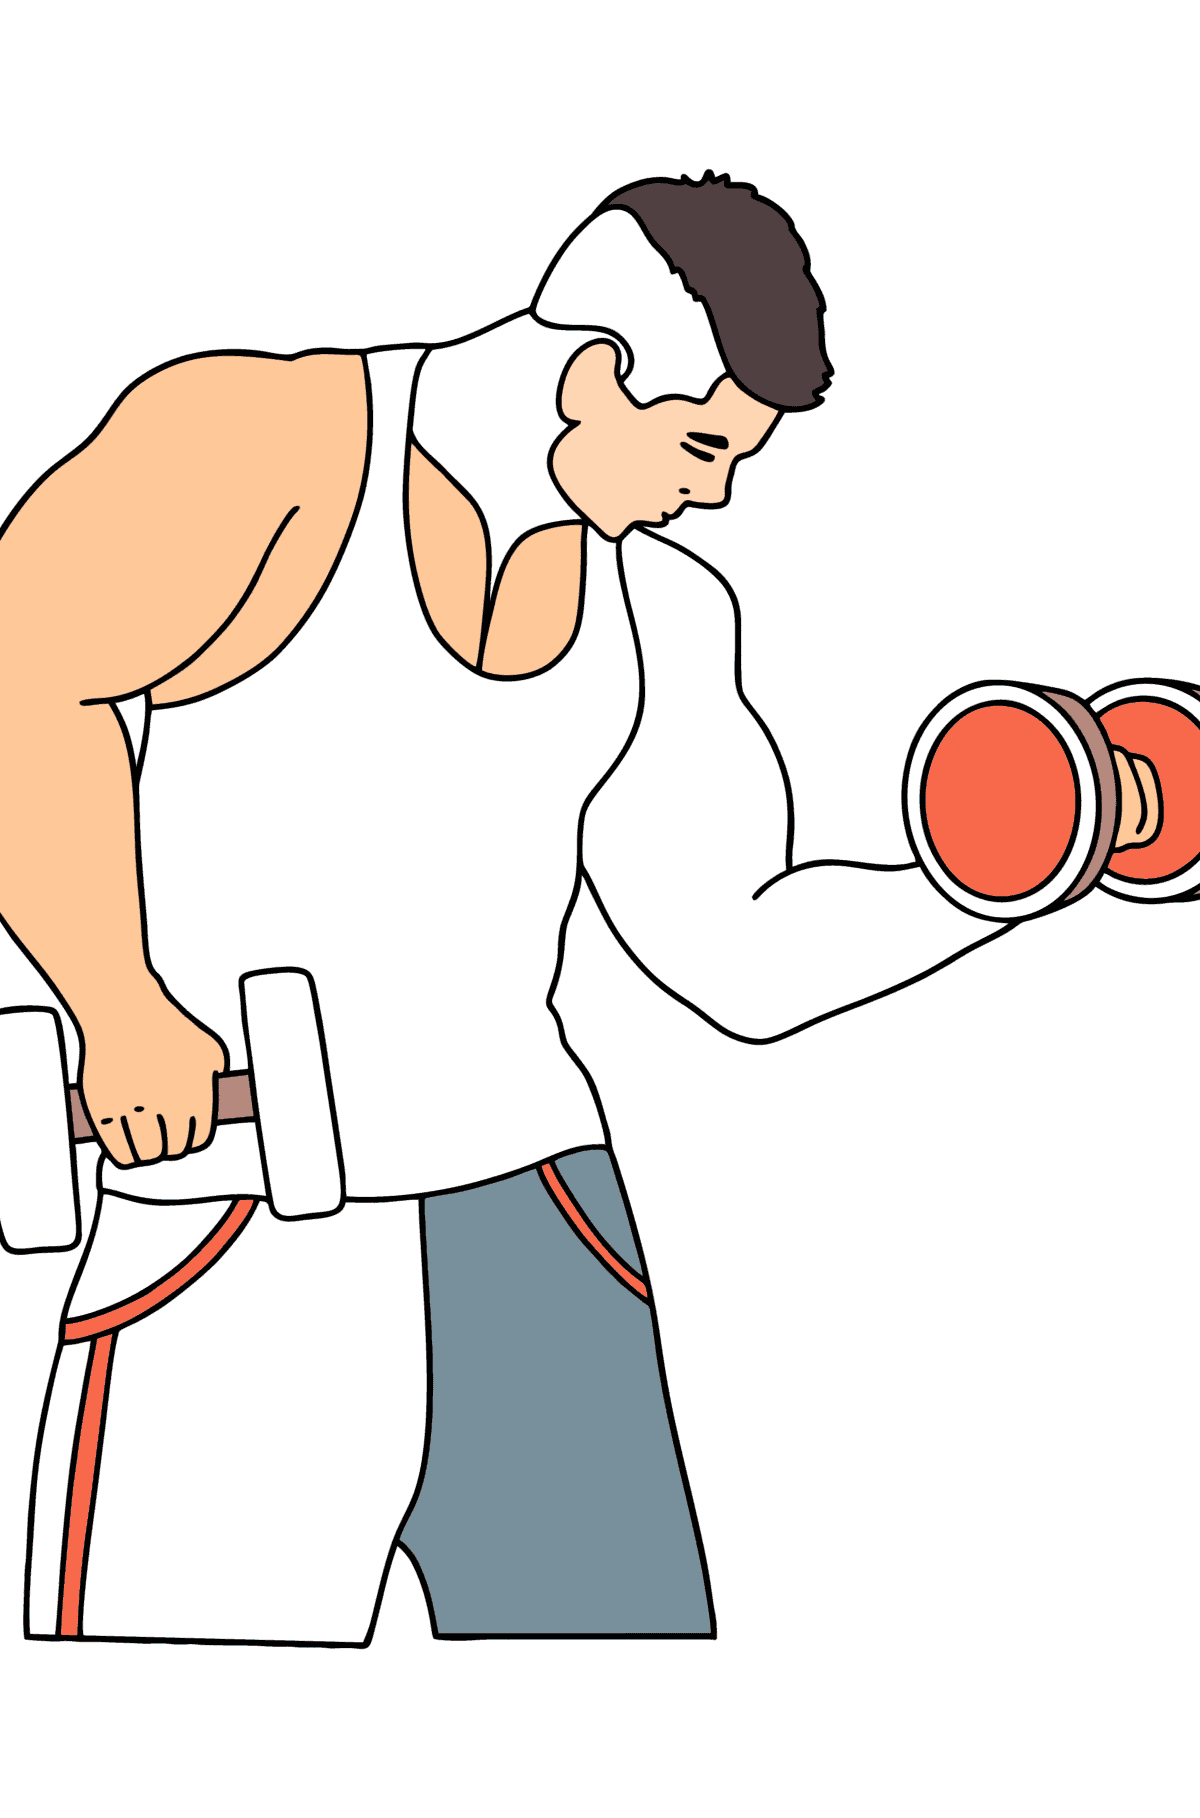 Man in the gym сoloring page - Coloring Pages for Kids